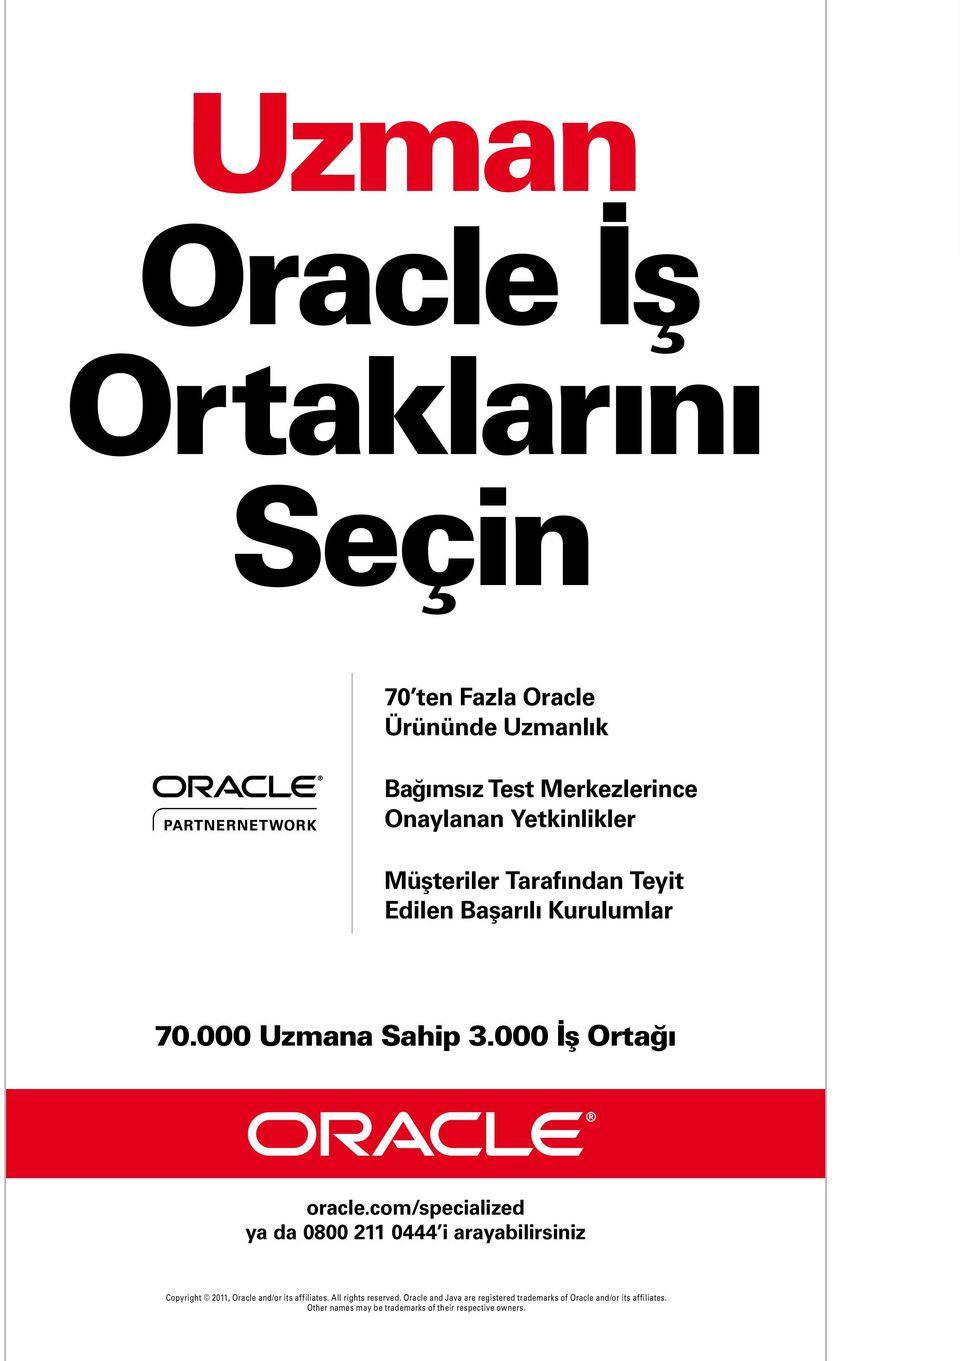 com/specialized ya da 0800 211 0444 i arayabilirsiniz Copyright 2011, Oracle and/or its affiliates. All rights reserved.